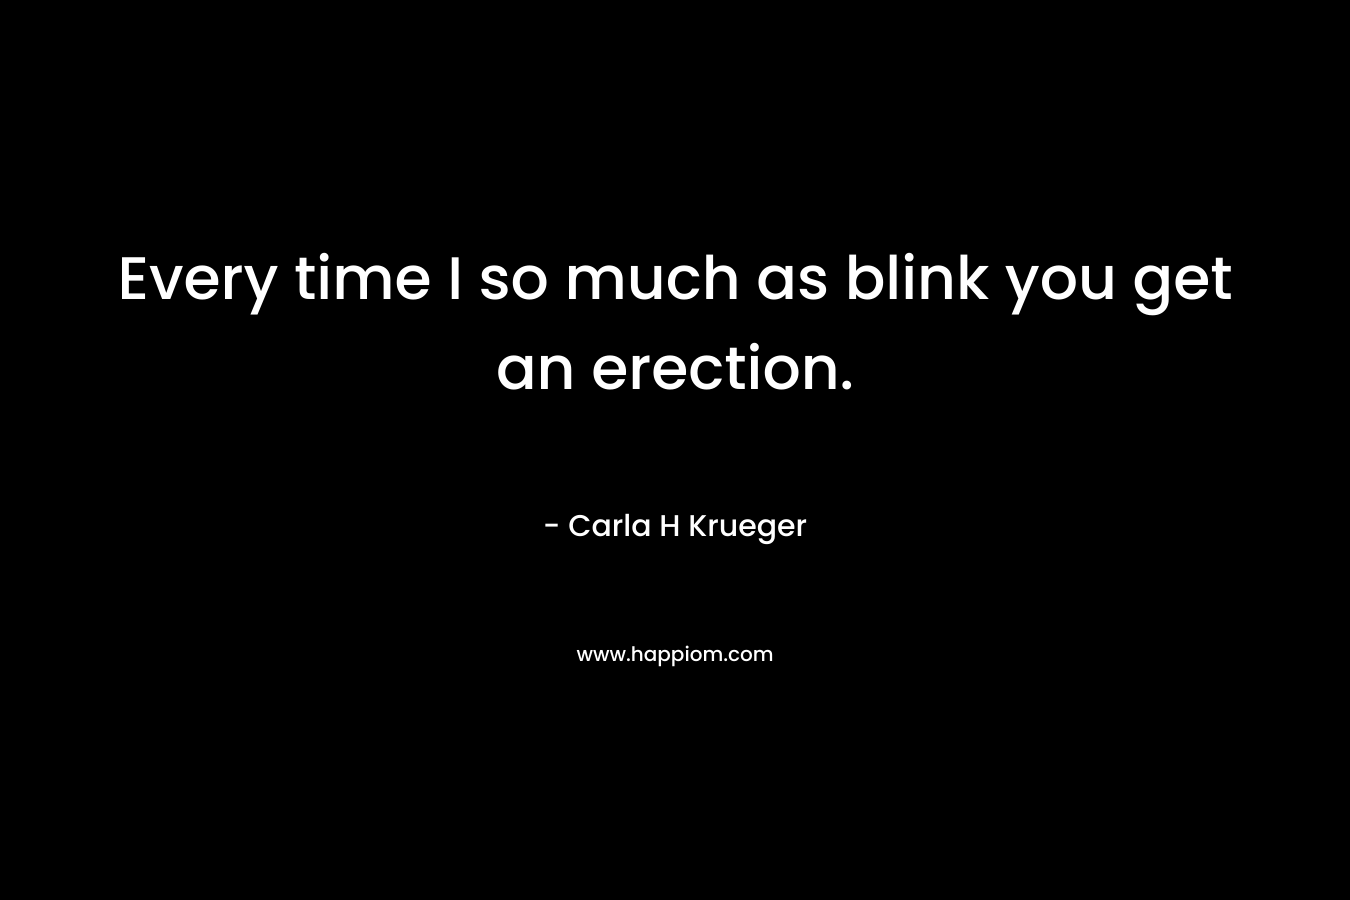 Every time I so much as blink you get an erection.